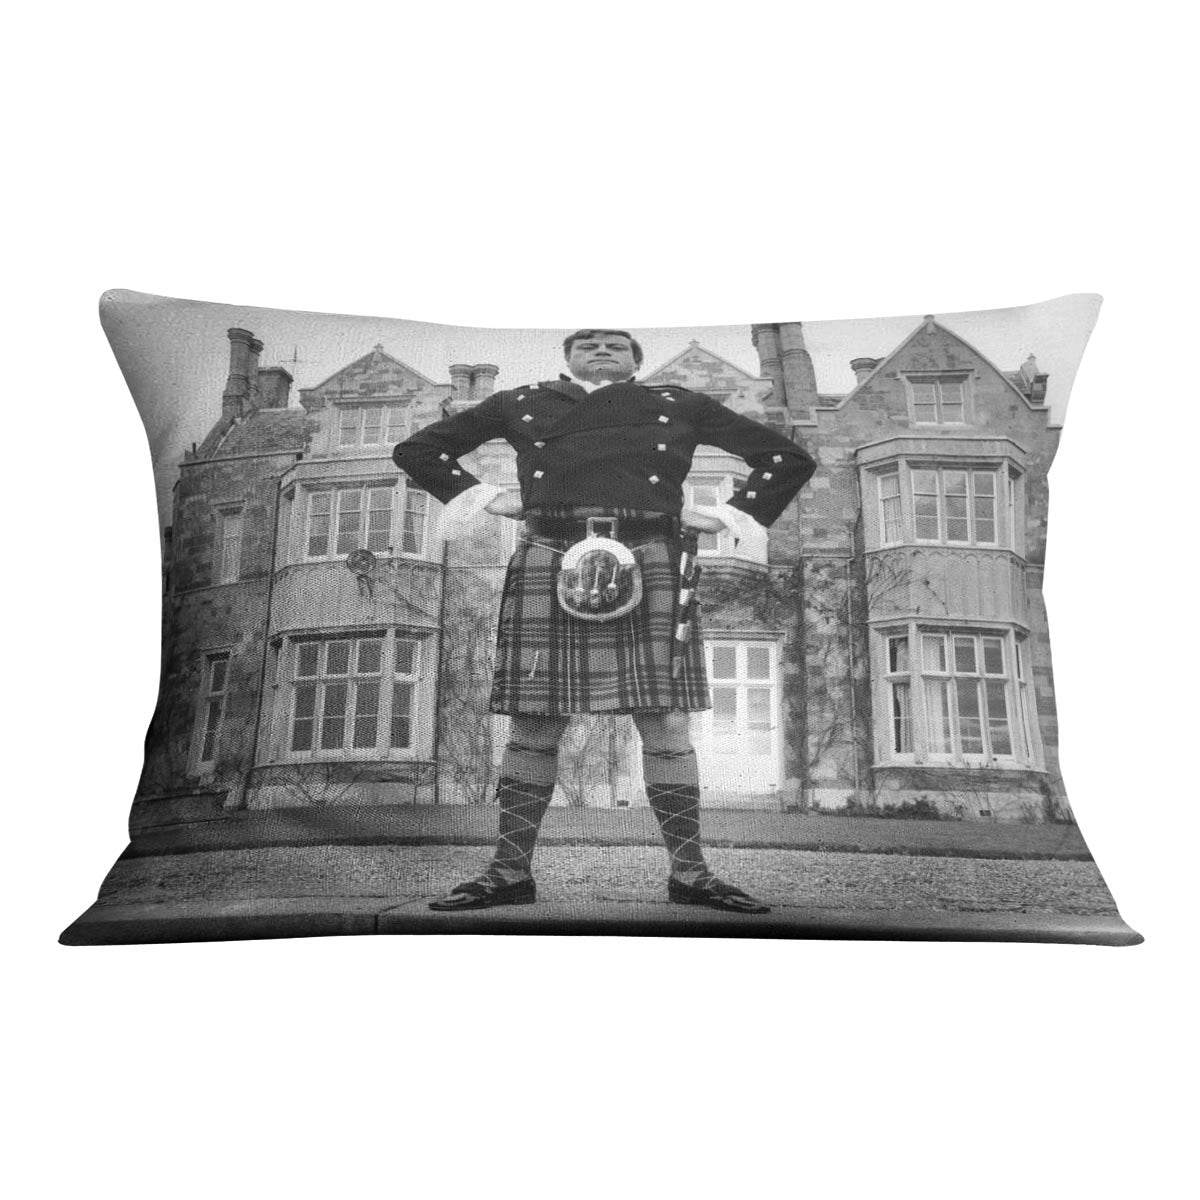 Oliver Reed in a kilt Cushion